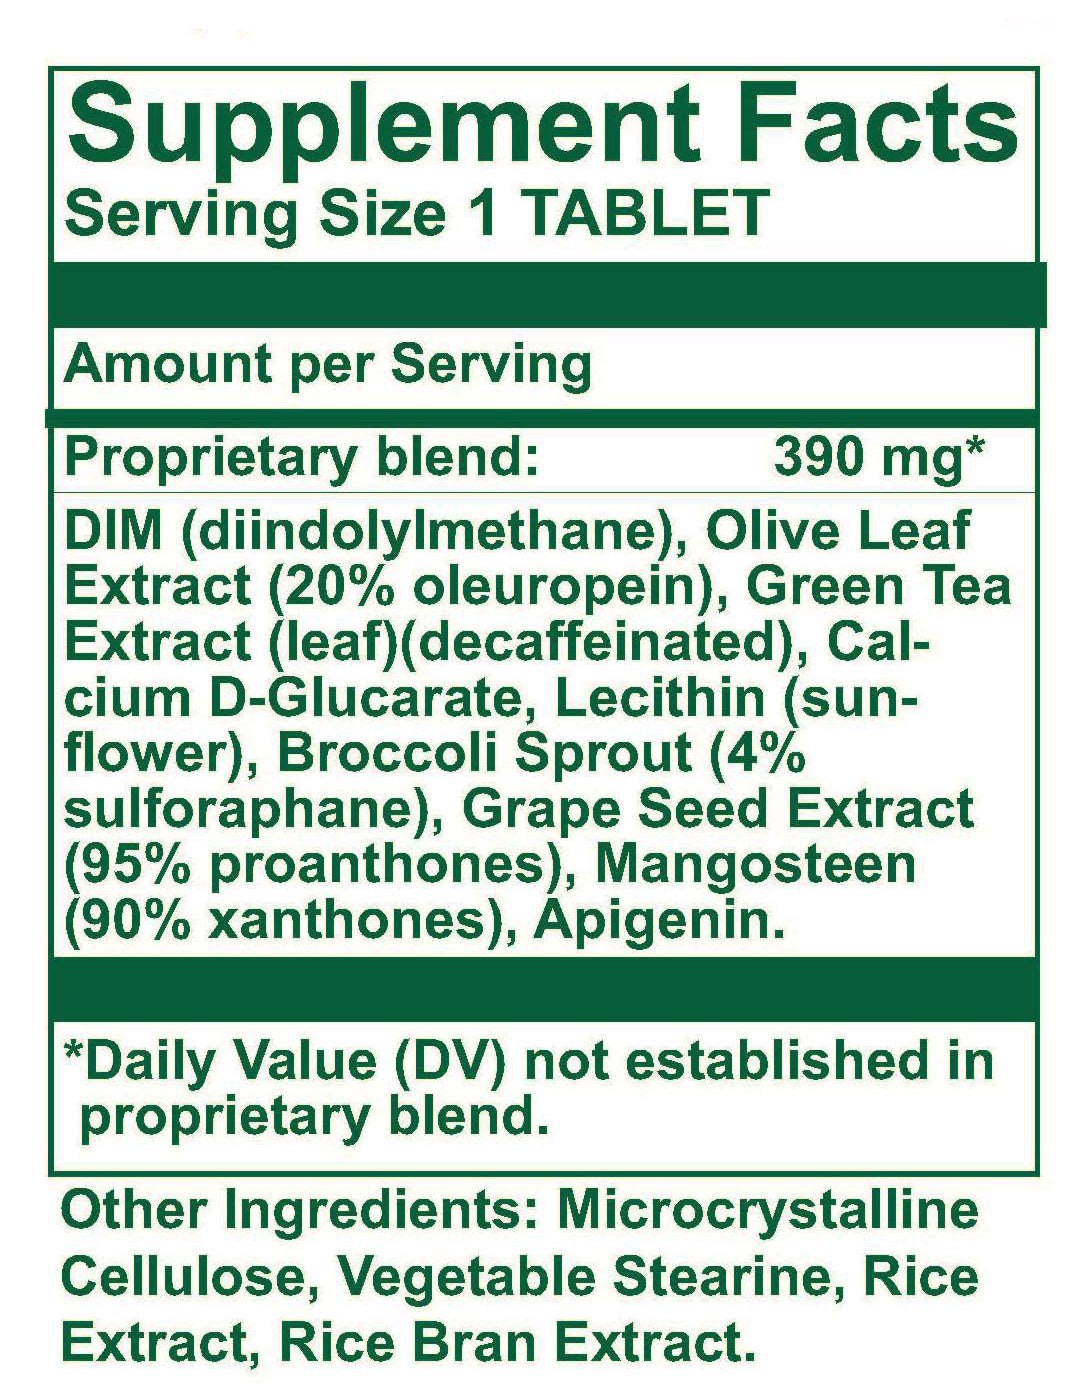 DIM Renew Nutrition Facts